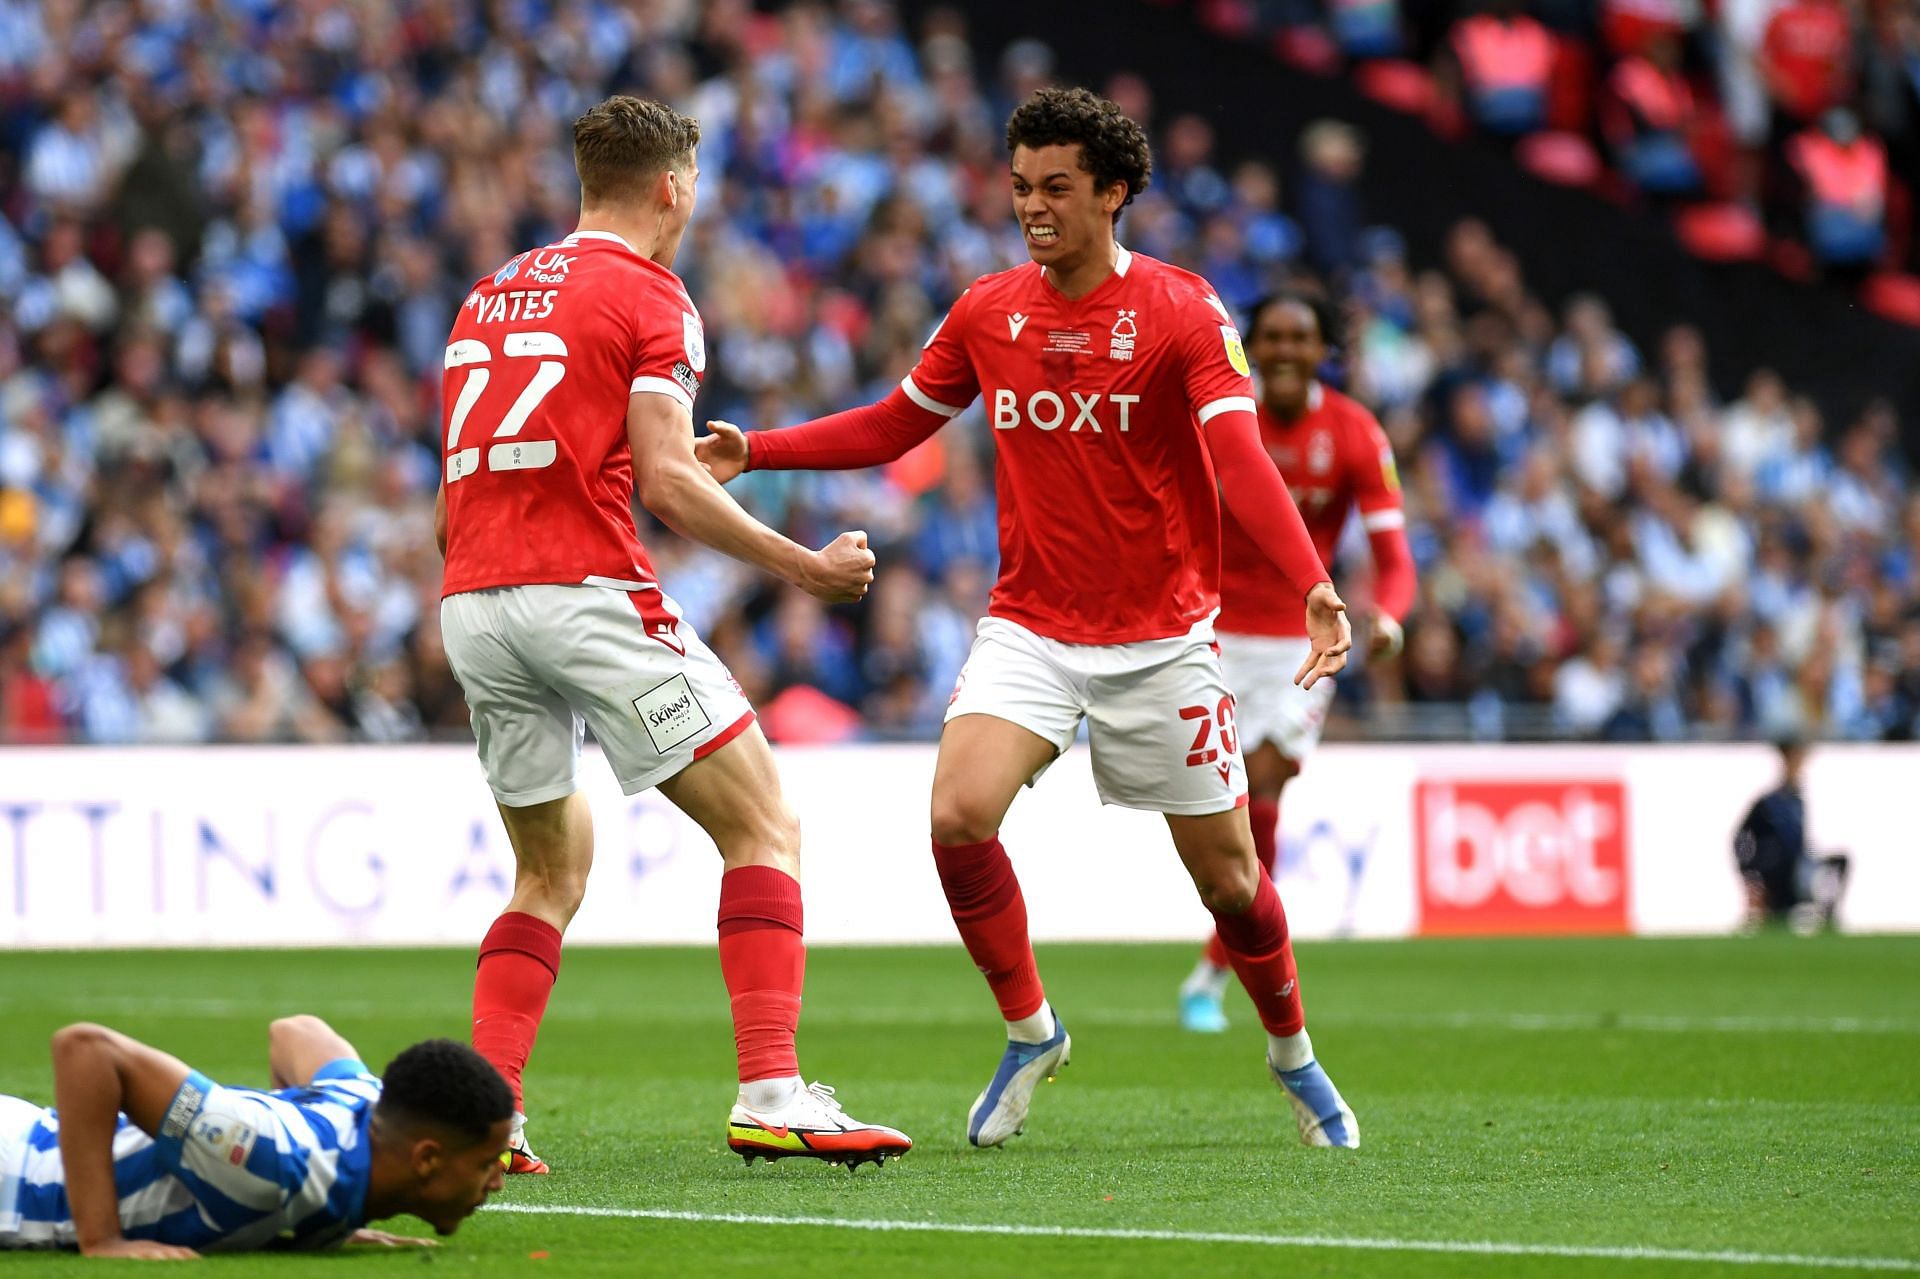 Nottingham Forest have returned to the Premier League.